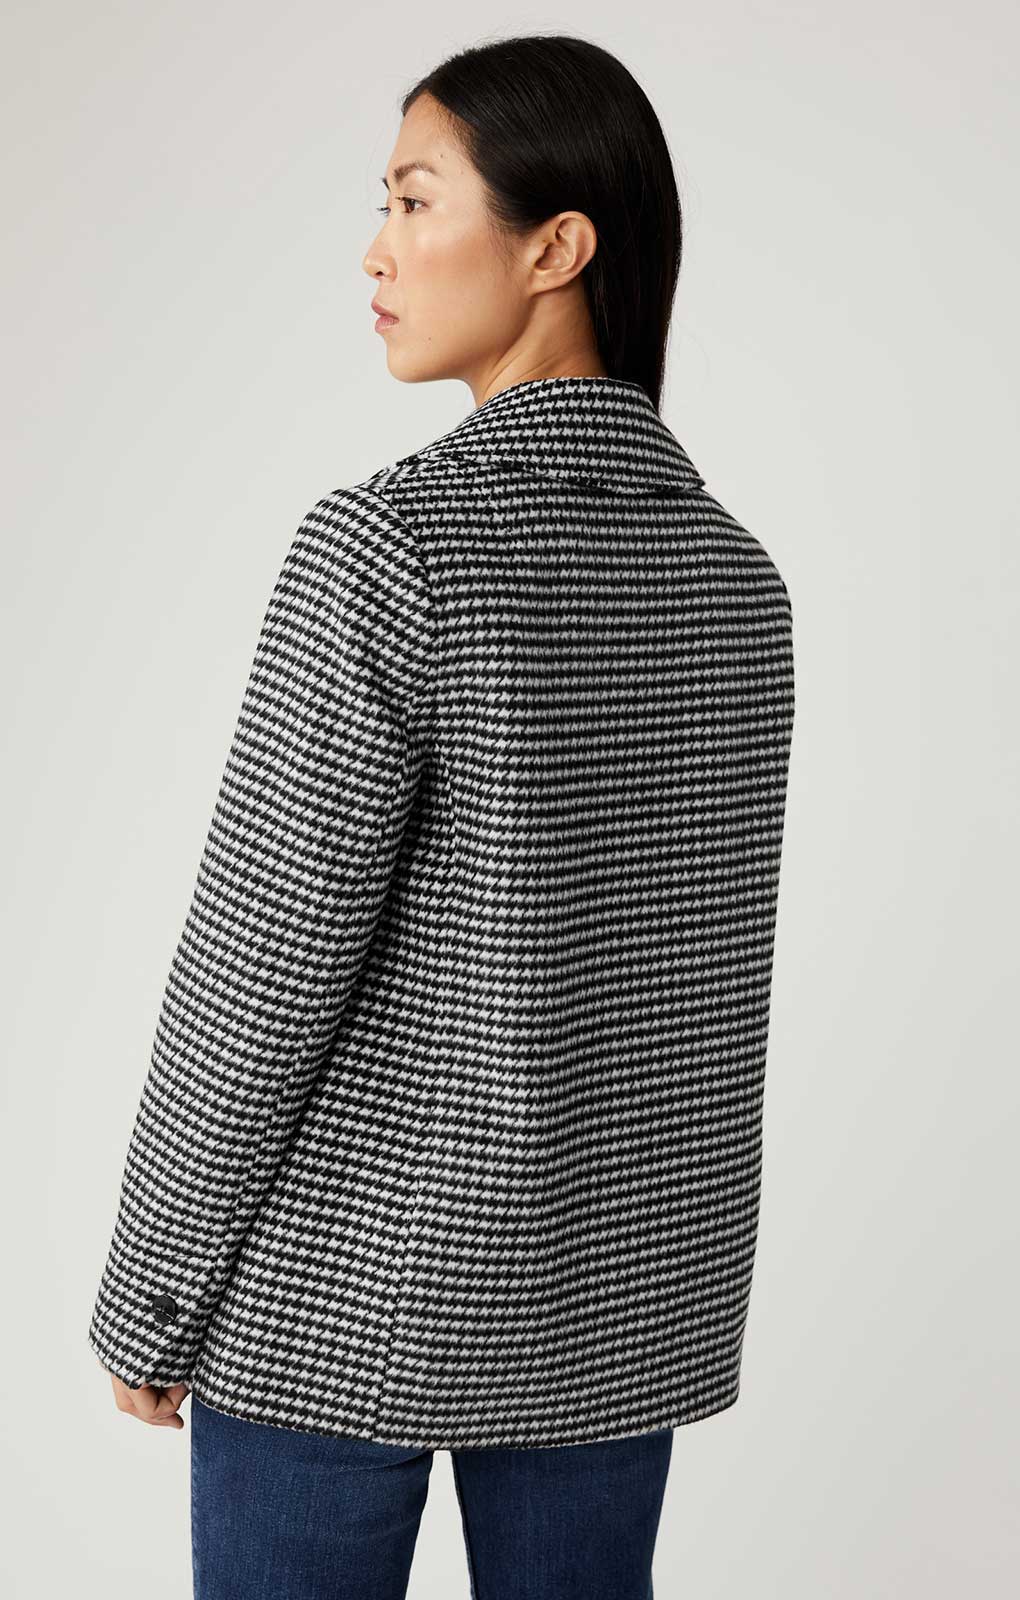 M&S Dogtooth Collared Short Coat with Wool product image